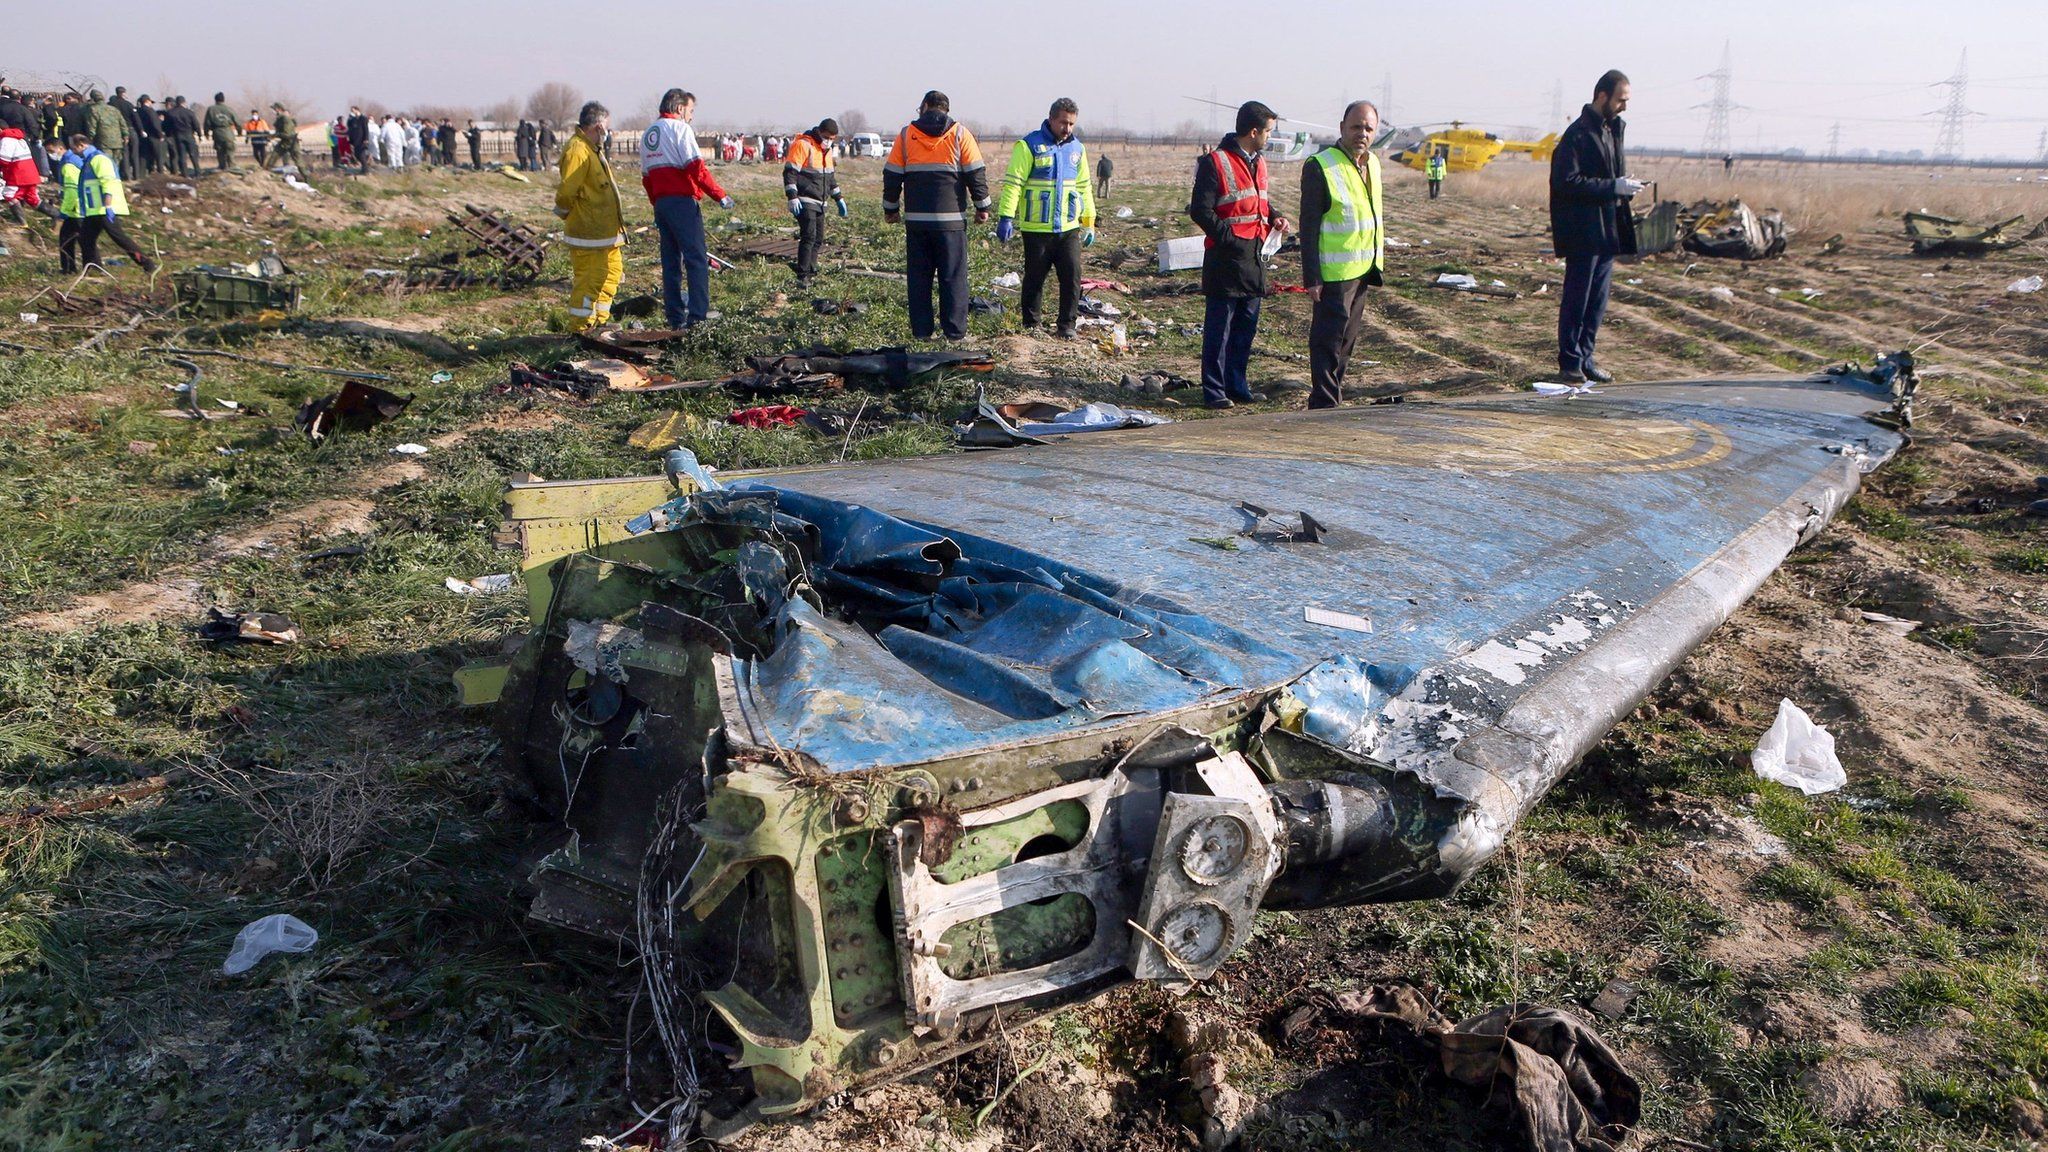 Rescue teams inspect the wreckage of Ukrainian International Airlines flight PS752